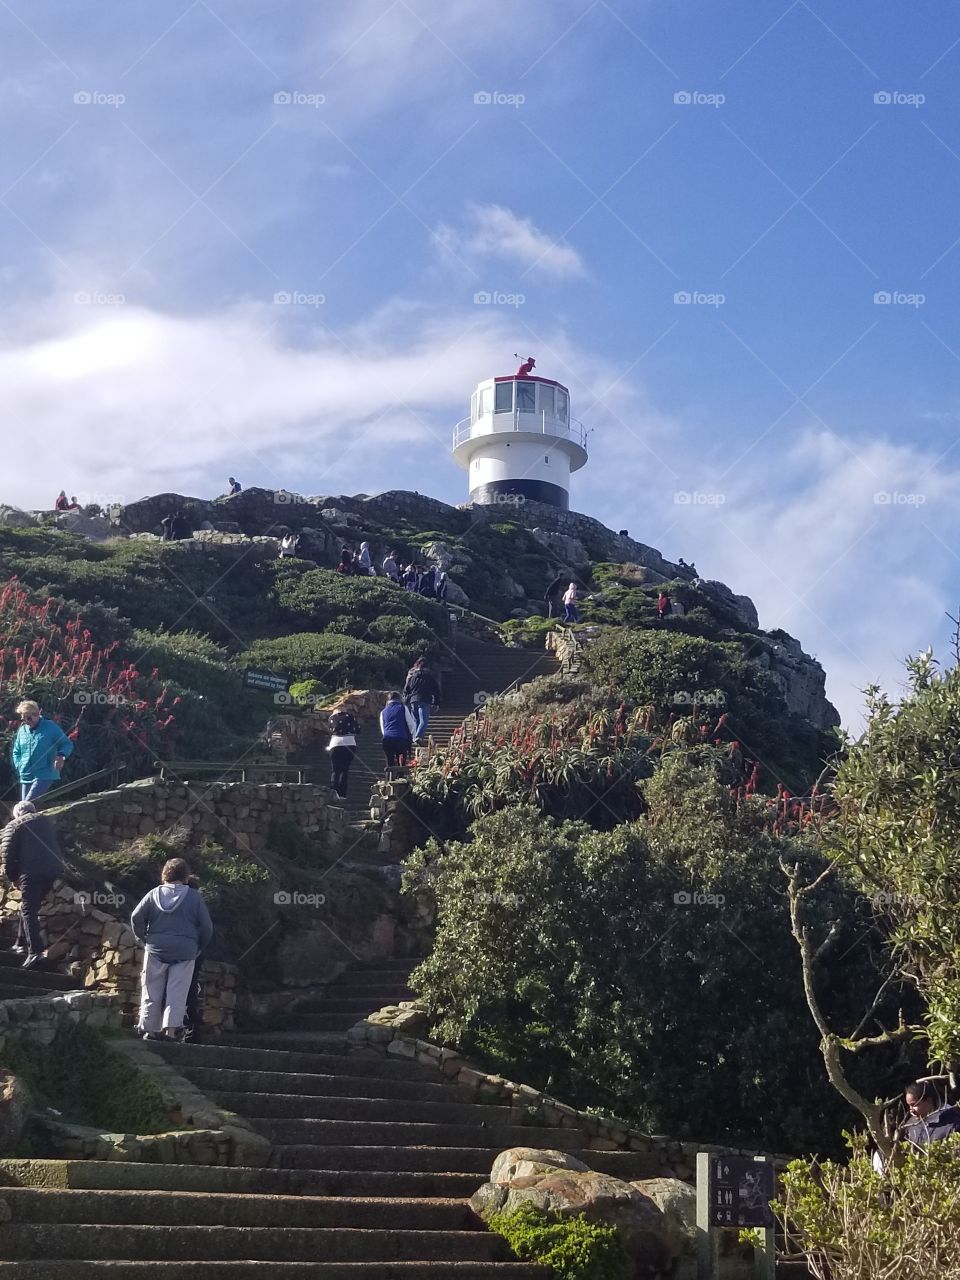 Cape of Good Hope lighthouse